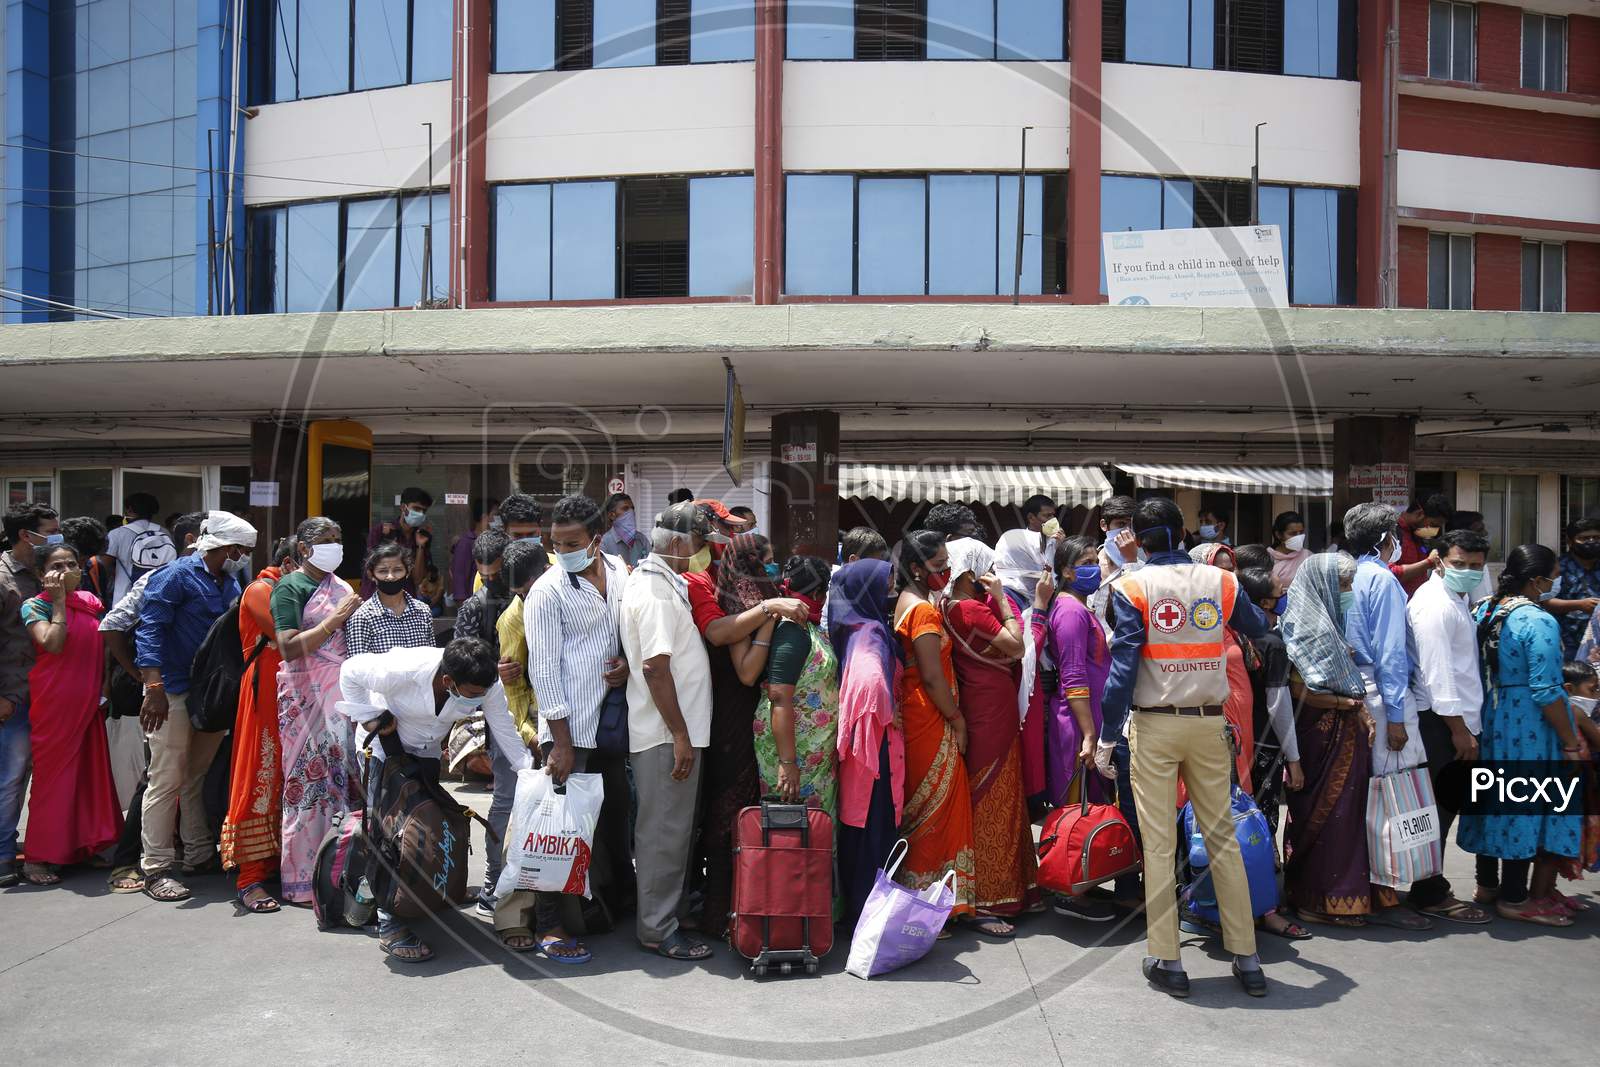 People wait in a queue to board public transport buses during the nationwide lockdown to stop the spread of Coronavirus (COVID-19) in Bangalore, India, May 03, 2020.